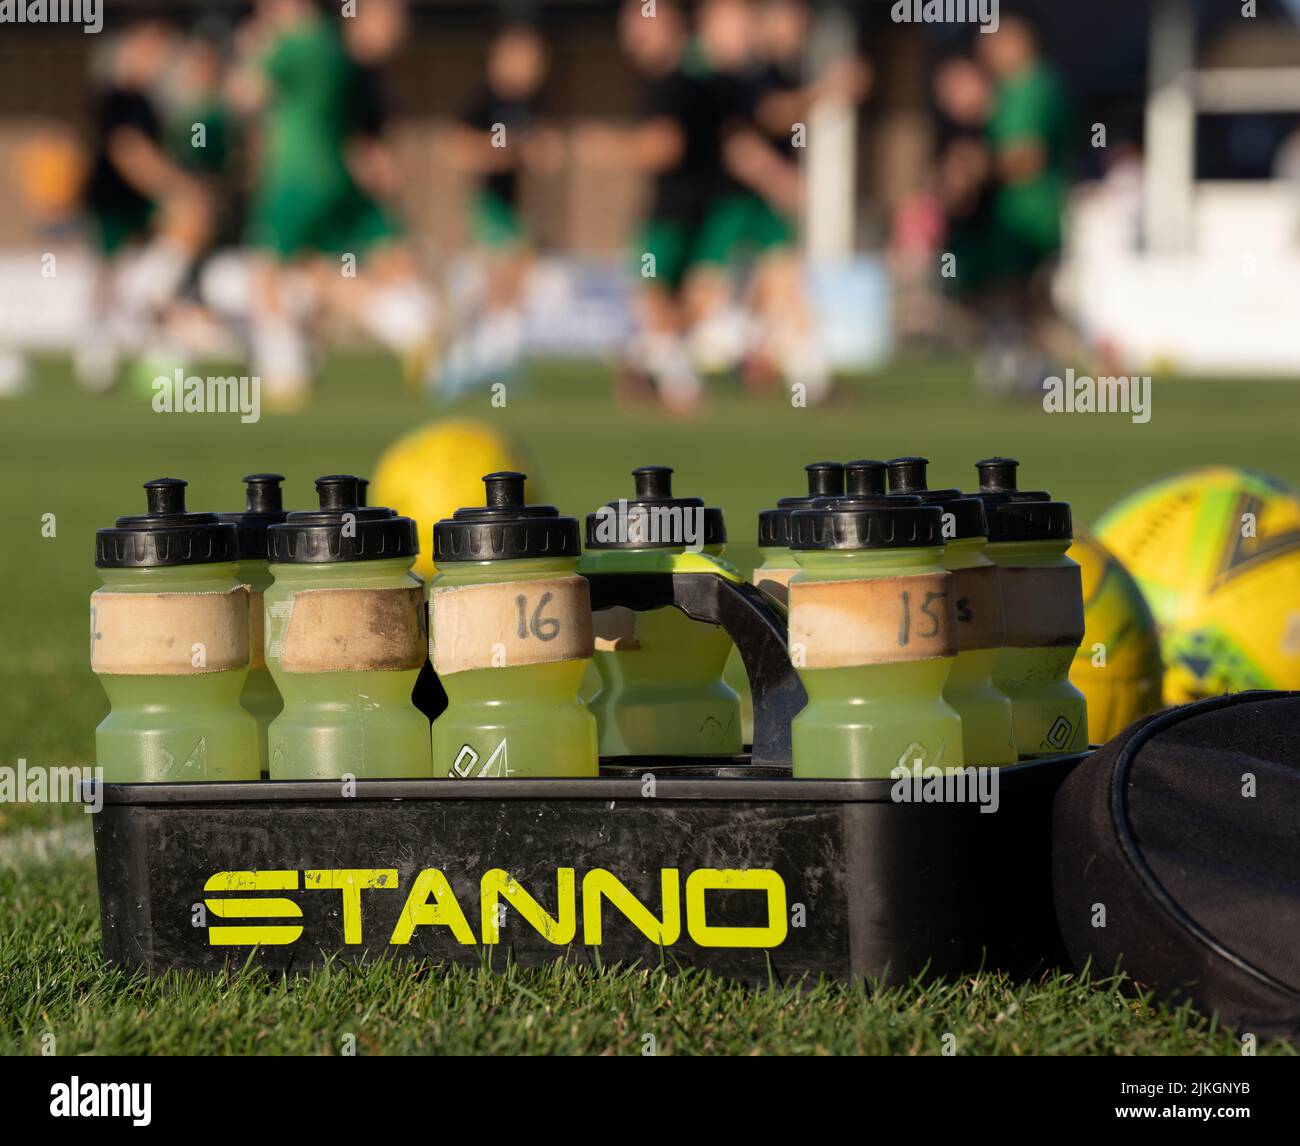 Yellow plastic refillable water bottles with black tops sit in a STANNO carrier on a grass football pitch (soccer). Players warm up in the background. Stock Photo